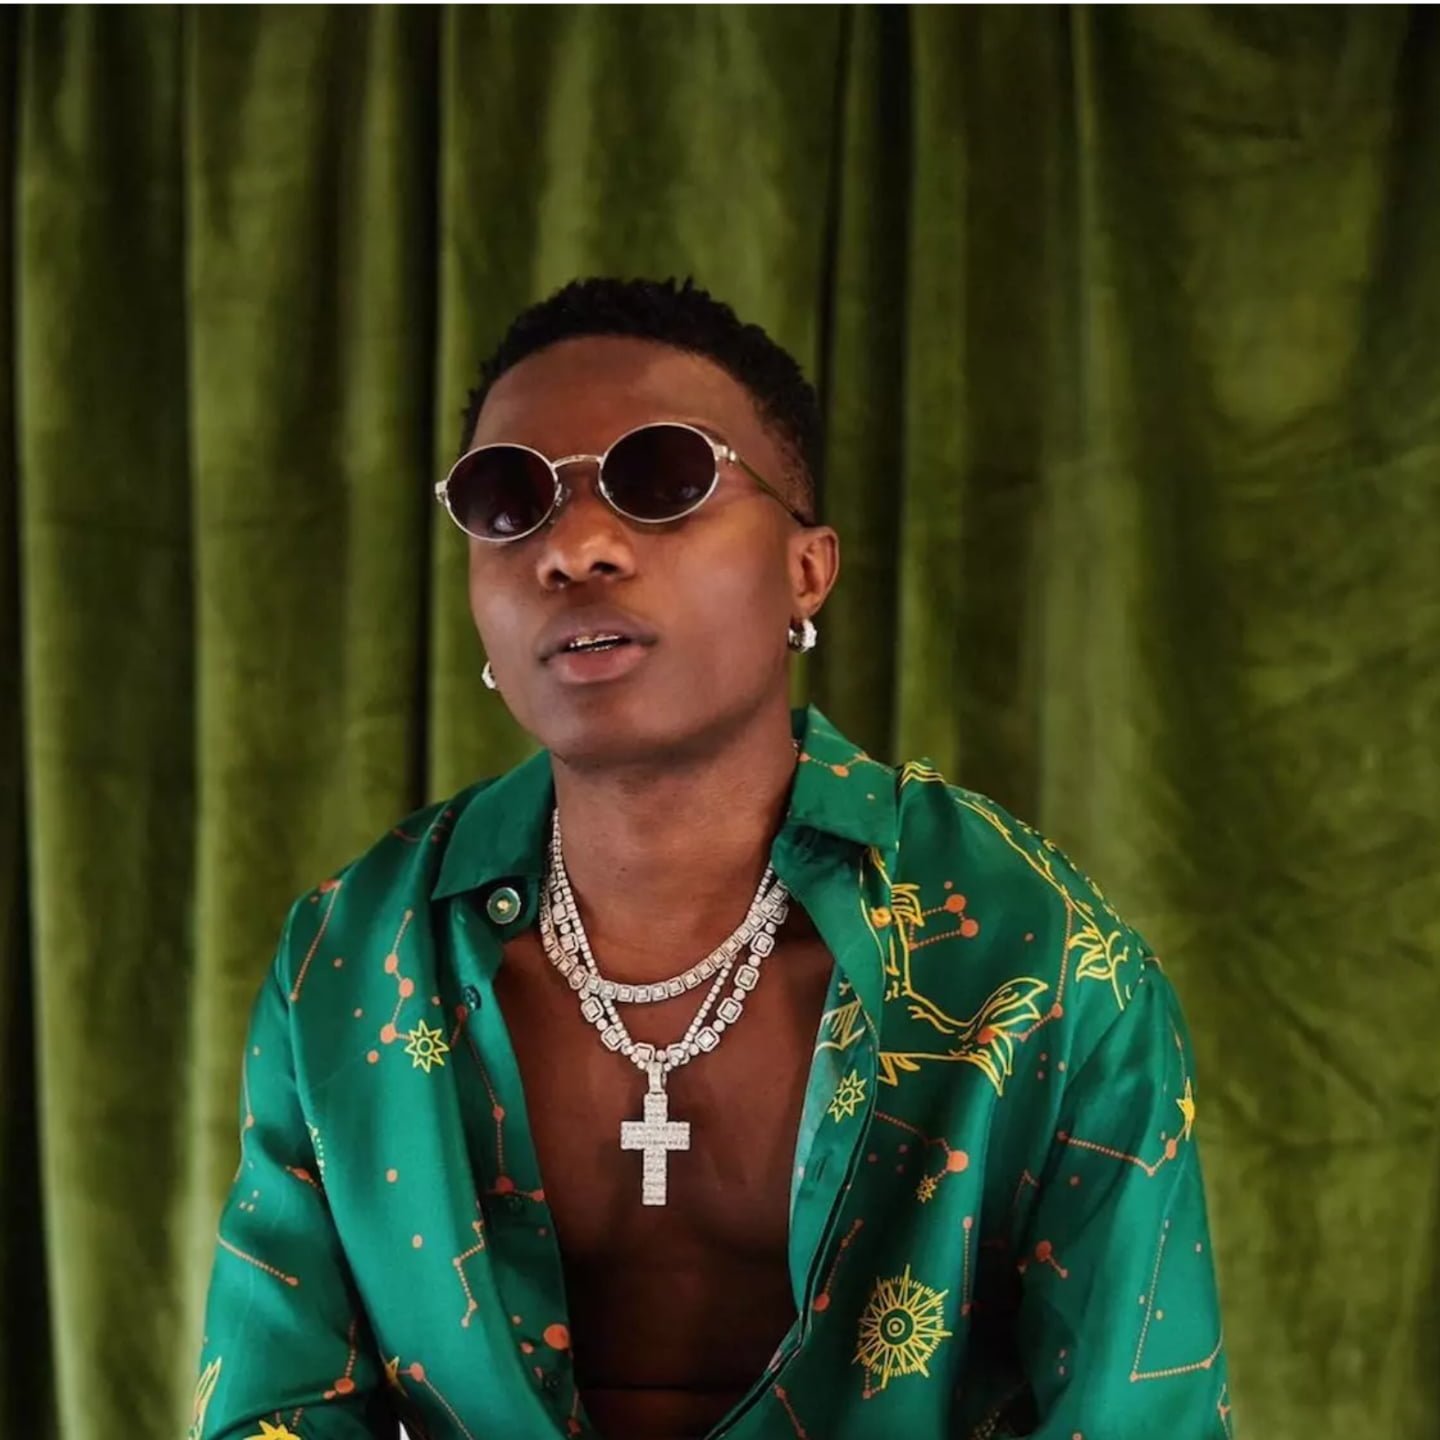 Wizkid Reveals His Preferences: Ronaldo Over Messi, Fela Over Marley, and More